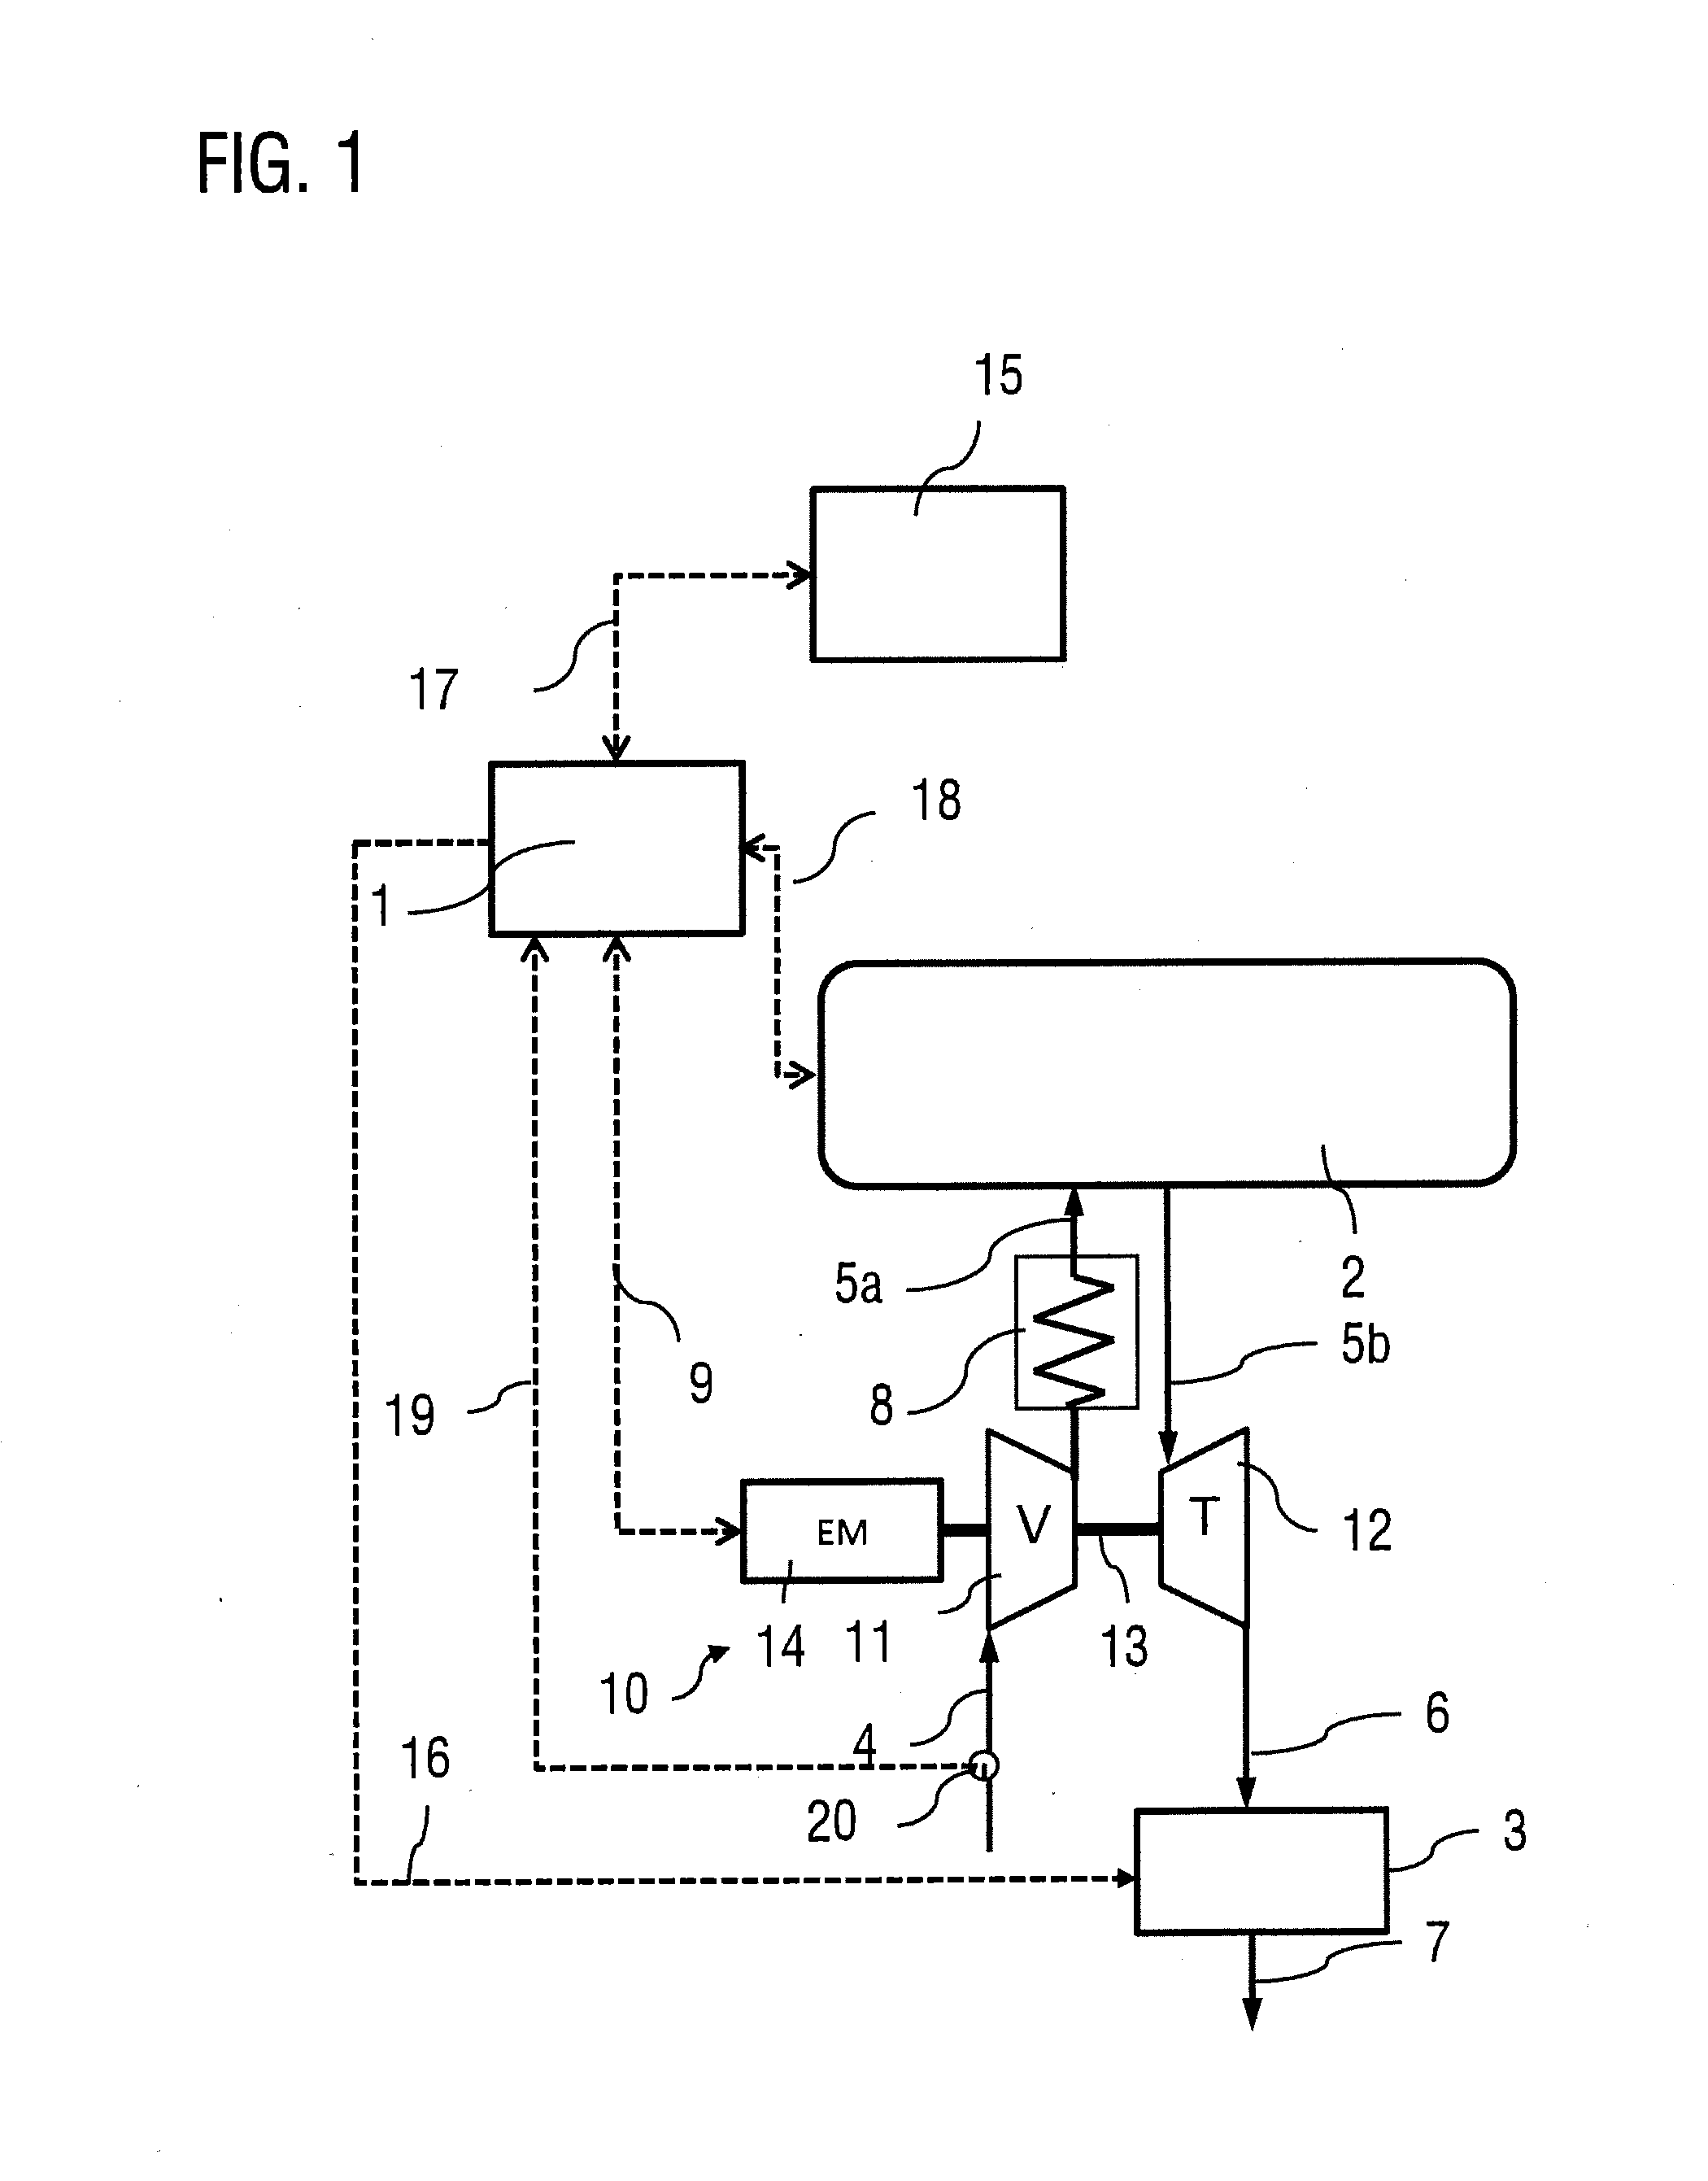 Method and device for raising and/or lowering an exhaust gas temperature of a combustion engine having an exhaust gas aftertreatment device arranged in an exhaust line